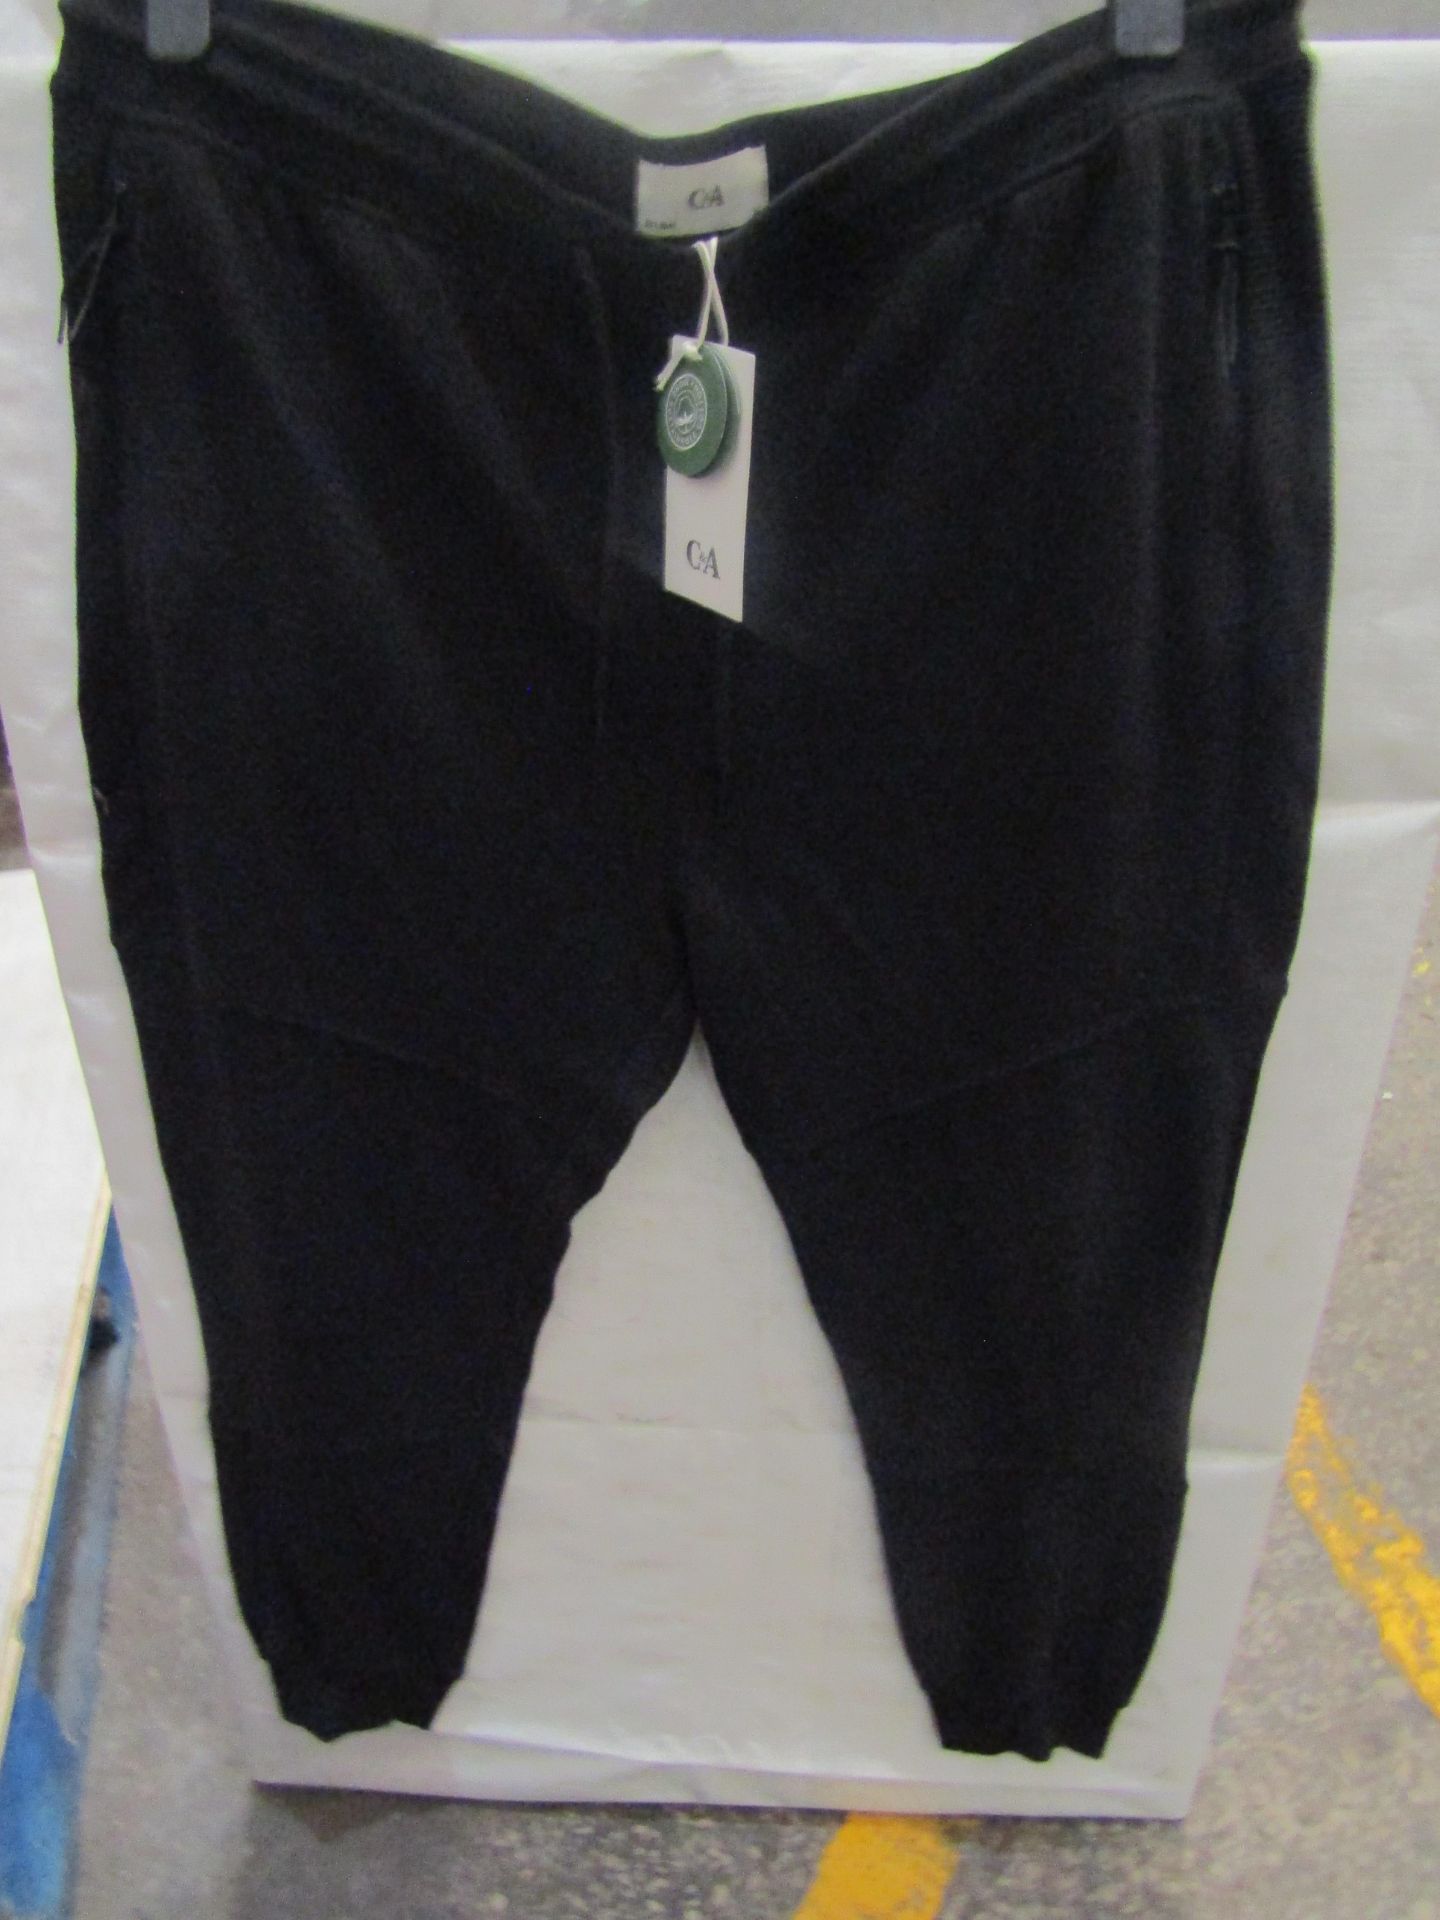 1 X Pair of C&A oggers Black Size X/L New With Tags